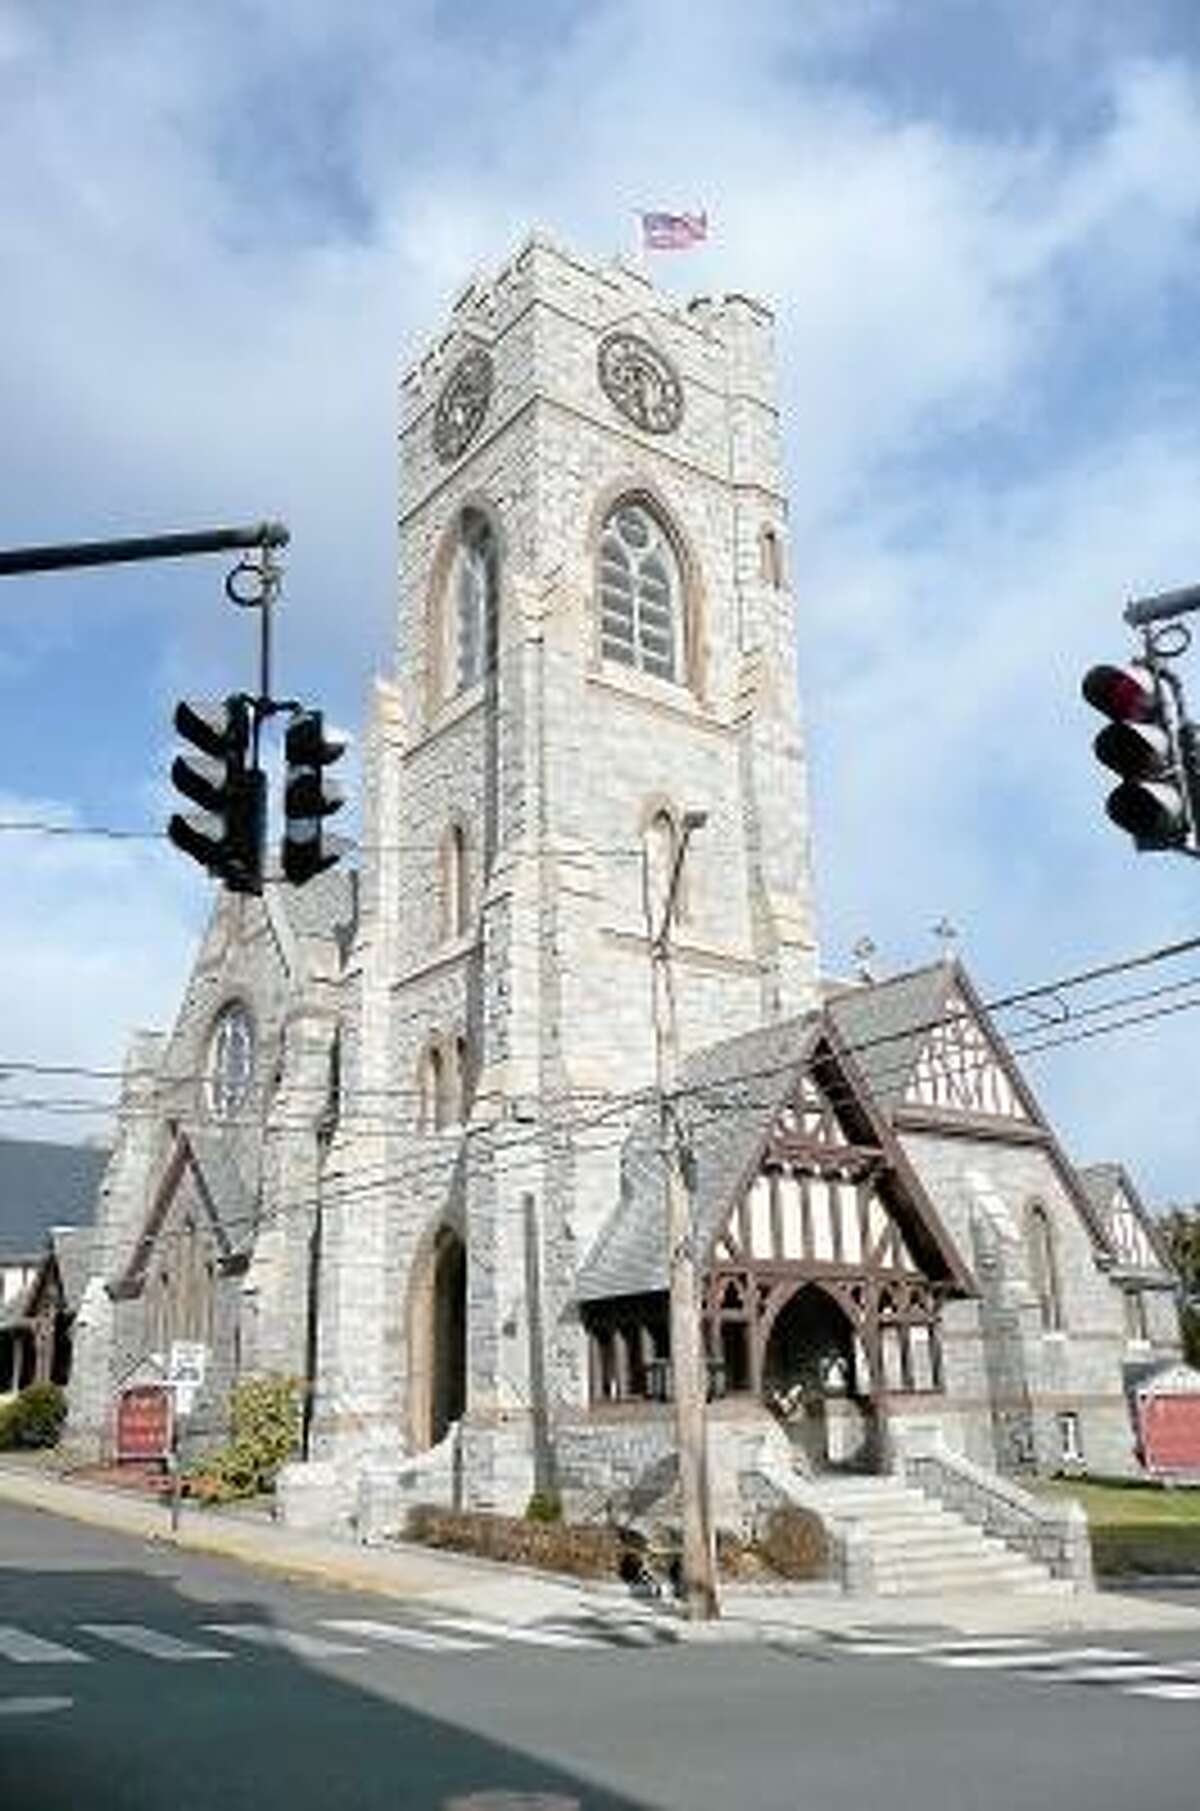 Trinity Episcopal Church hopes to finish the restoration of their clock tower this summer. (Kate Hartman/Register Citizen)